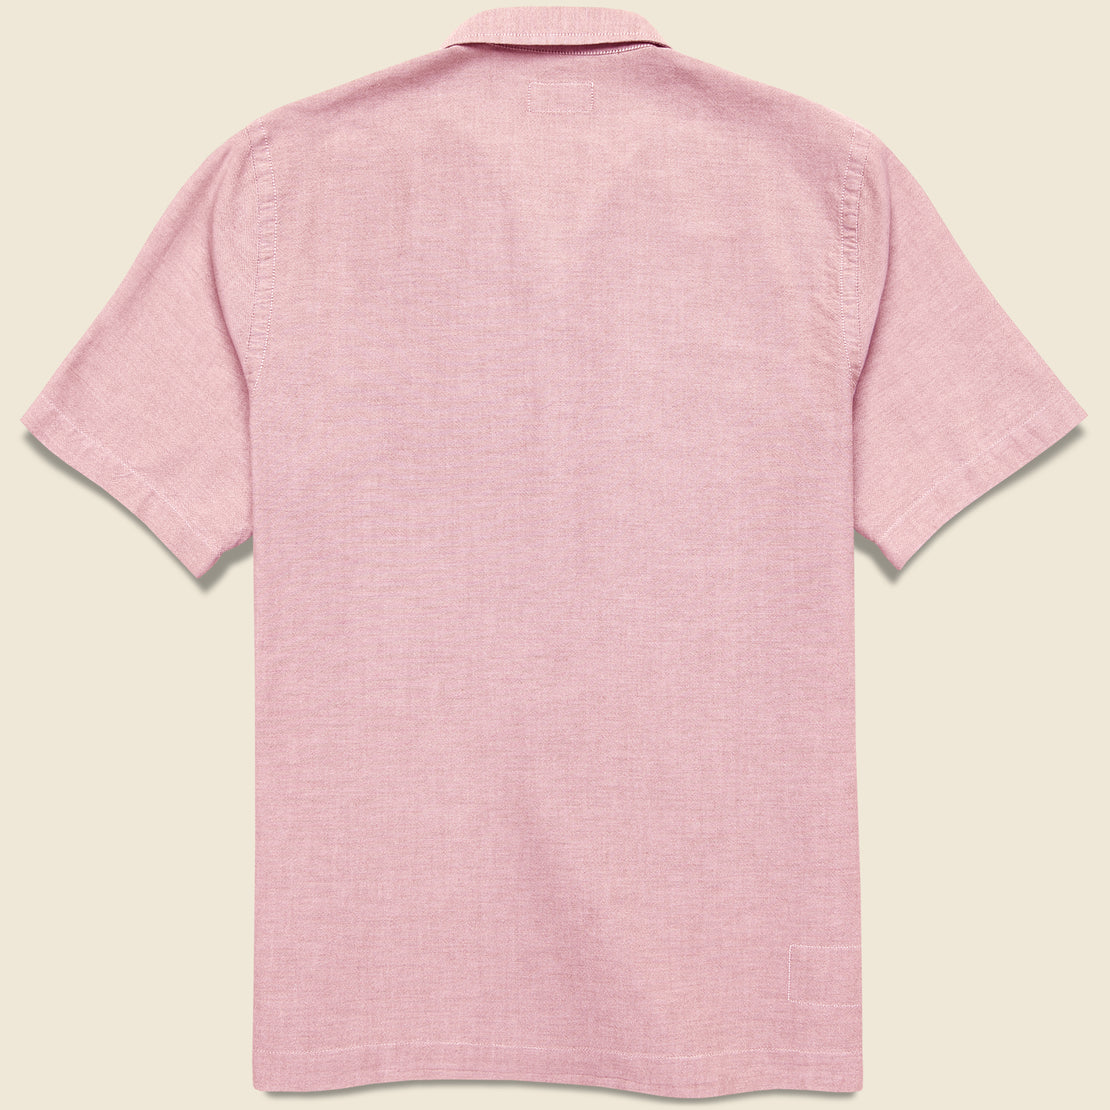 Oxford Road Shirt - Pink - Universal Works - STAG Provisions - Tops - S/S Woven - Solid